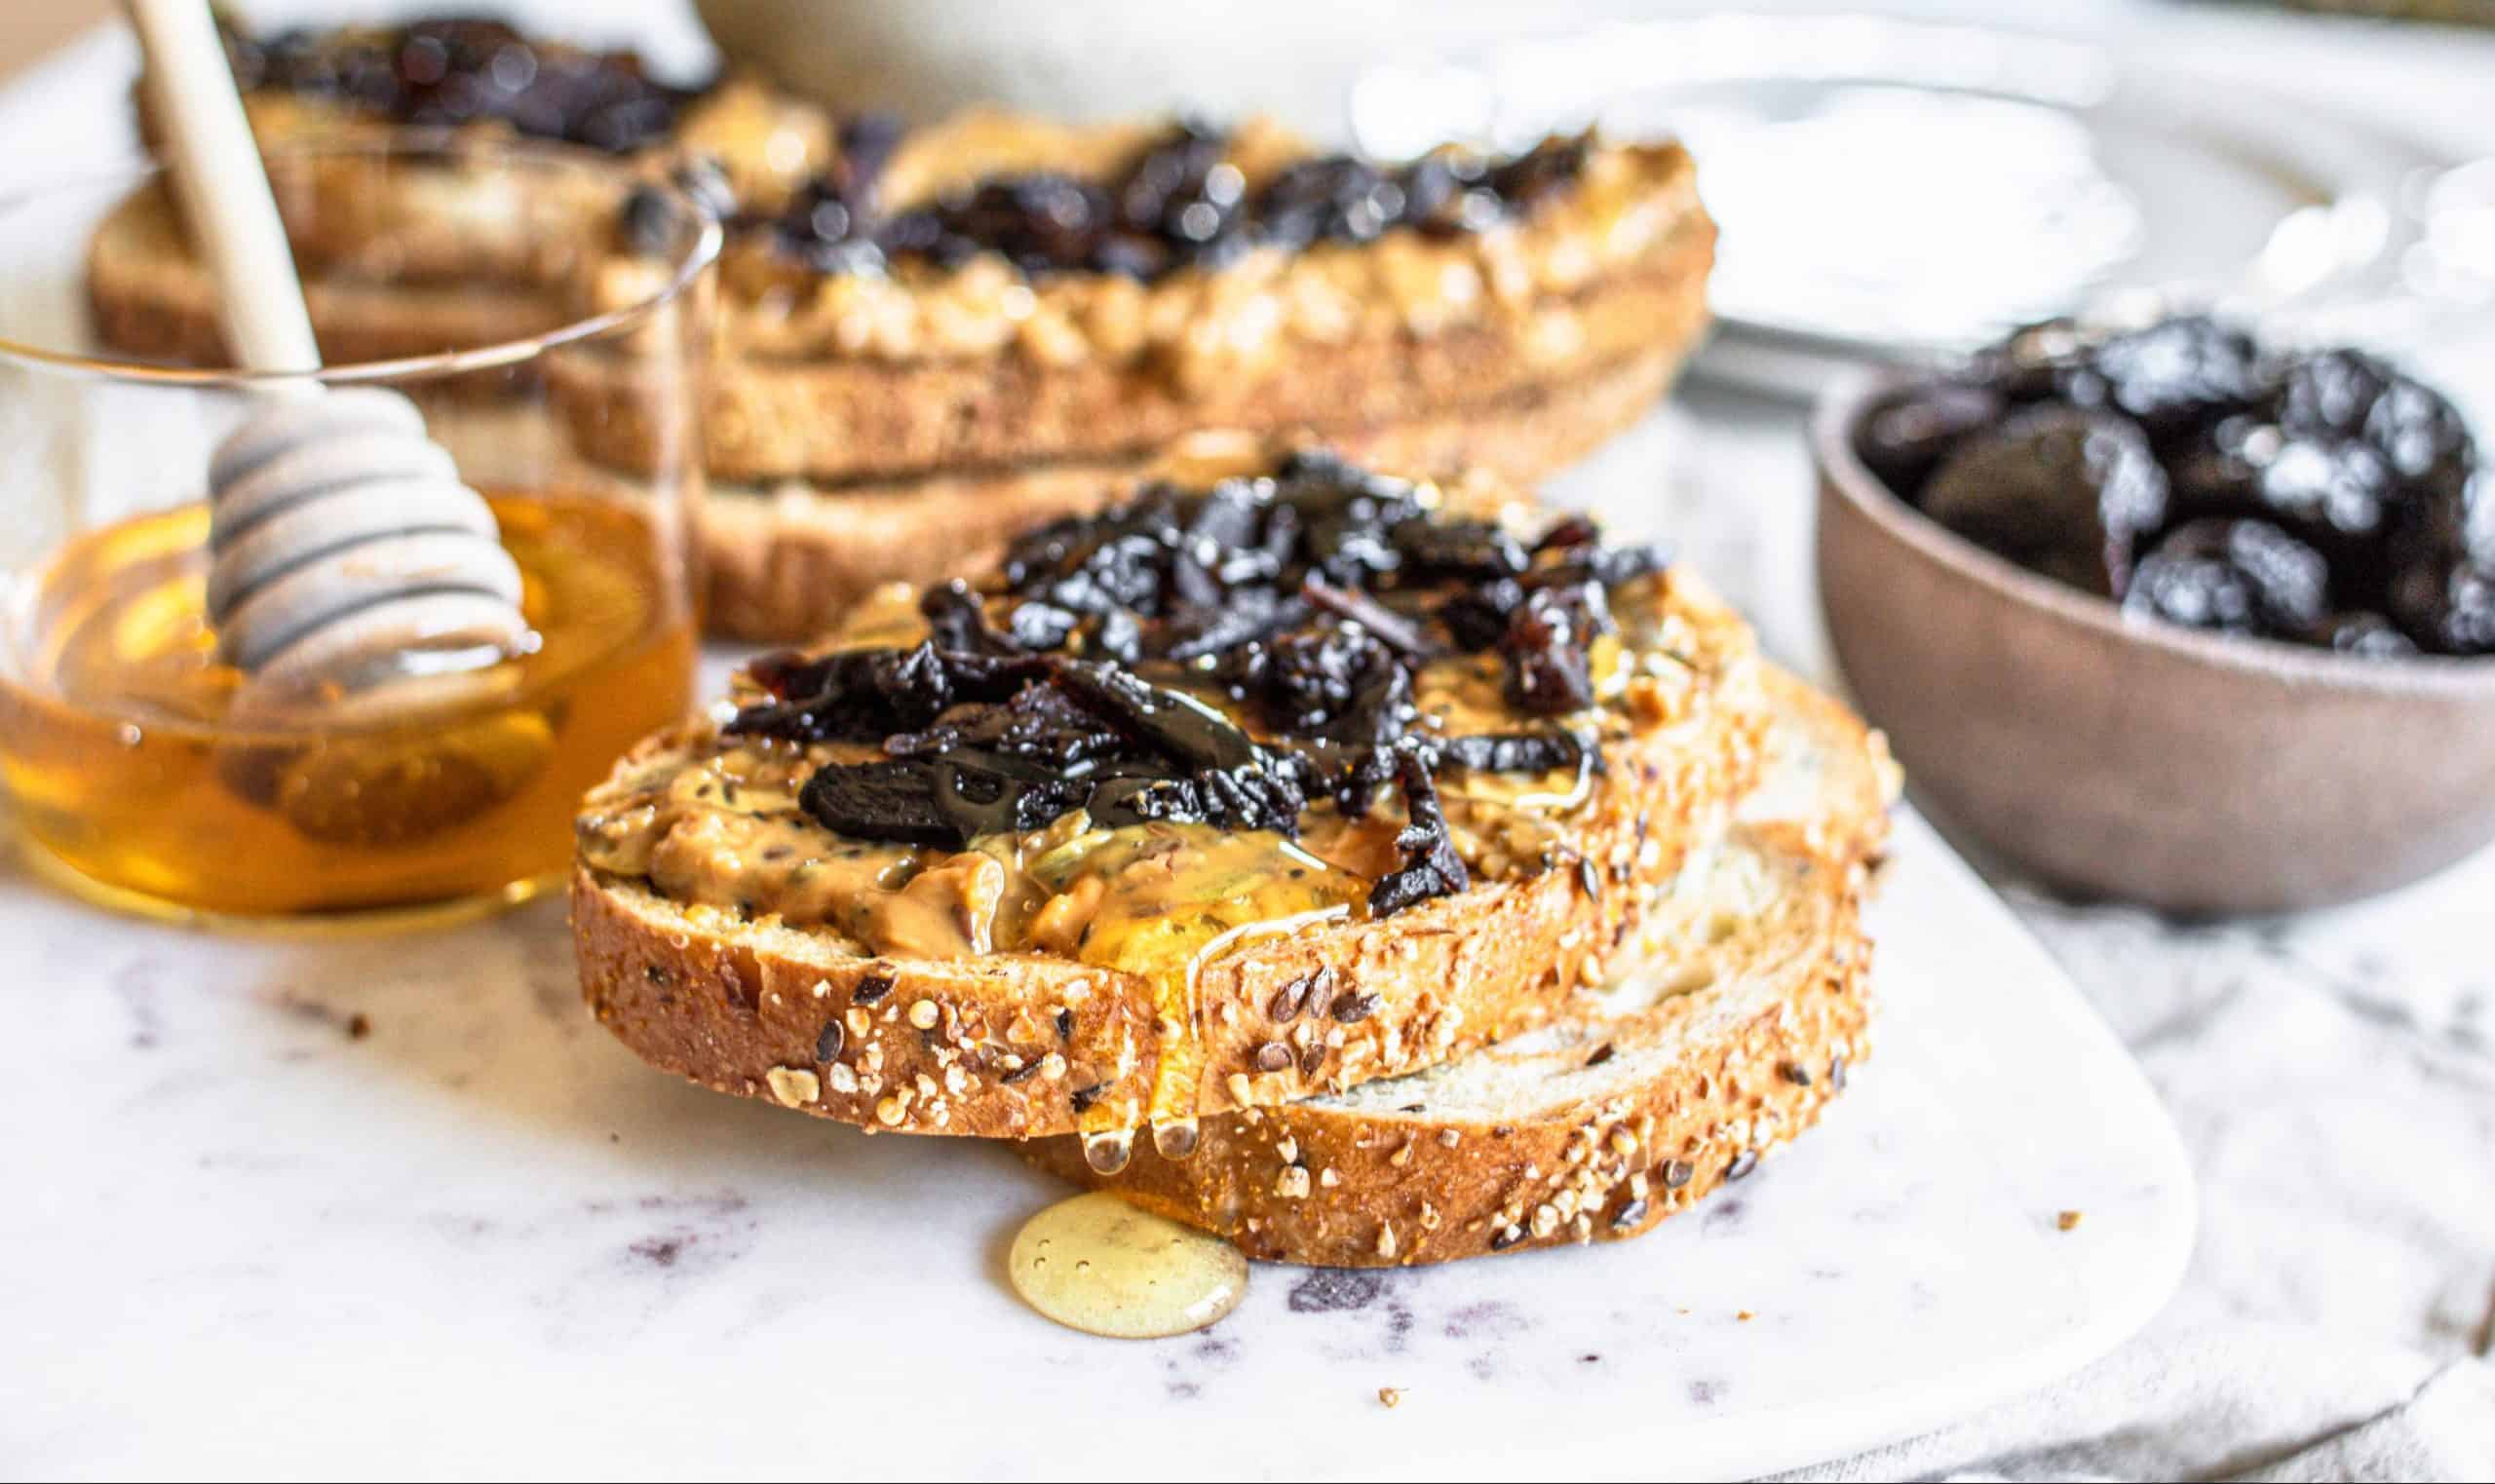 slices of bread topped with peanut butter, honey and prunes